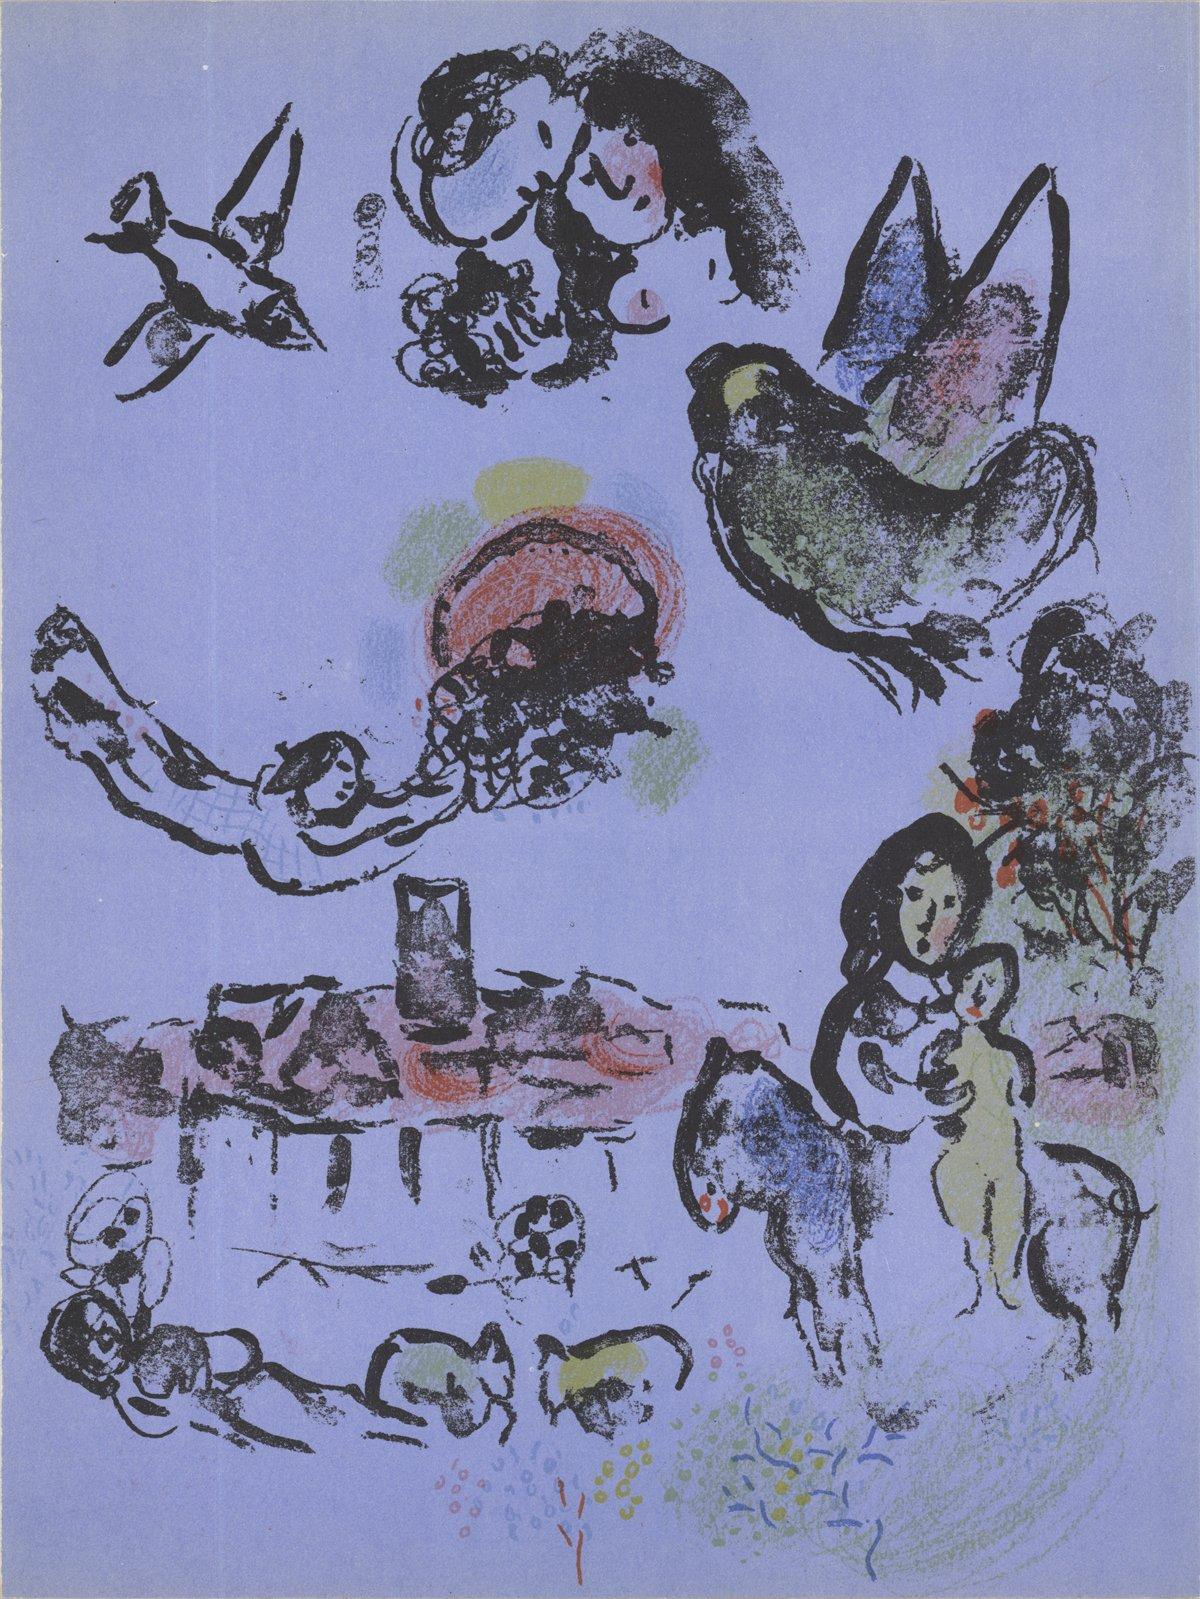 Paper Size: 12.5 x 9.5 inches ( 31.75 x 24.13 cm )
 Image Size: 12.5 x 9.5 inches ( 31.75 x 24.13 cm )
 Framed: No
 Condition: A: Mint
 
 Additional Details: First edition lithograph from Chagall's Lithographs Volume II. The catalogue reference is